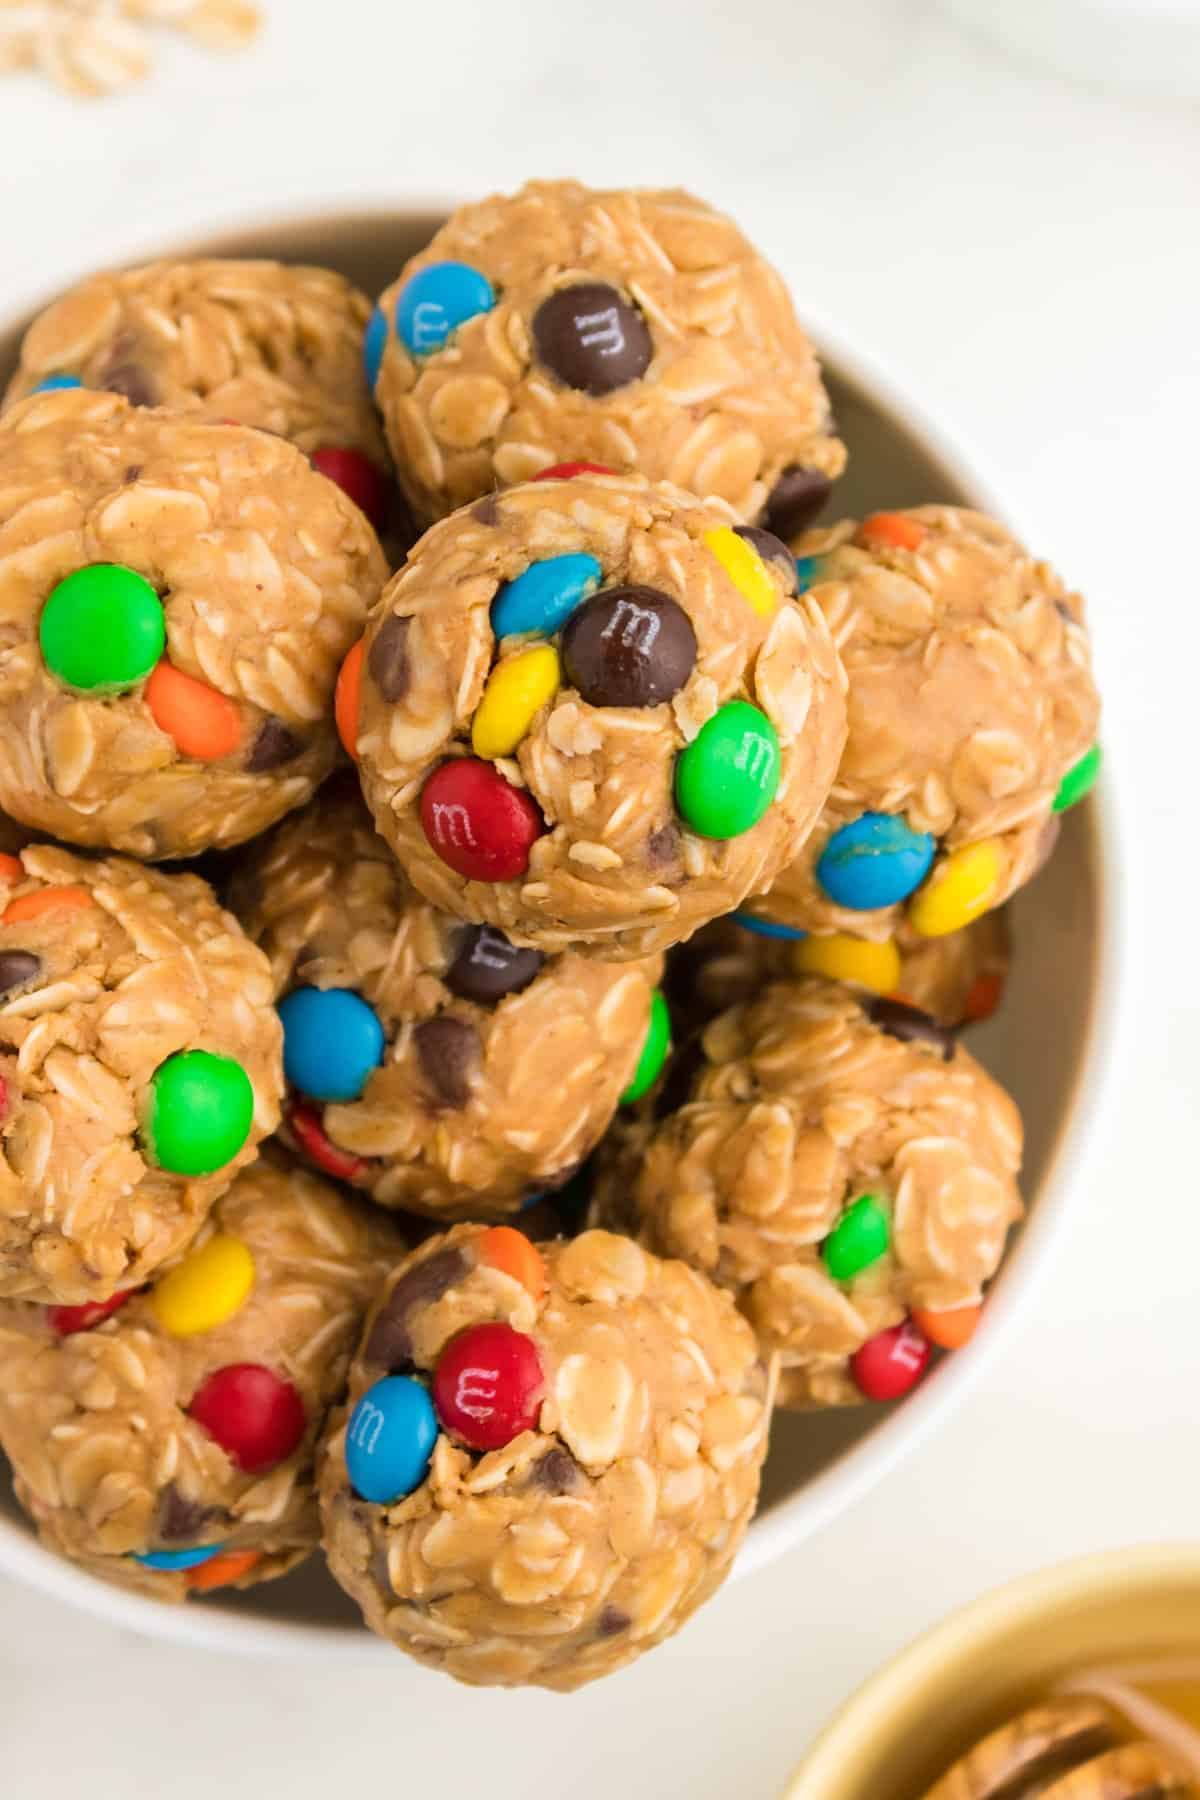 Bowl of no-bake energy balls with oats, chocolate chips, and M&Ms.